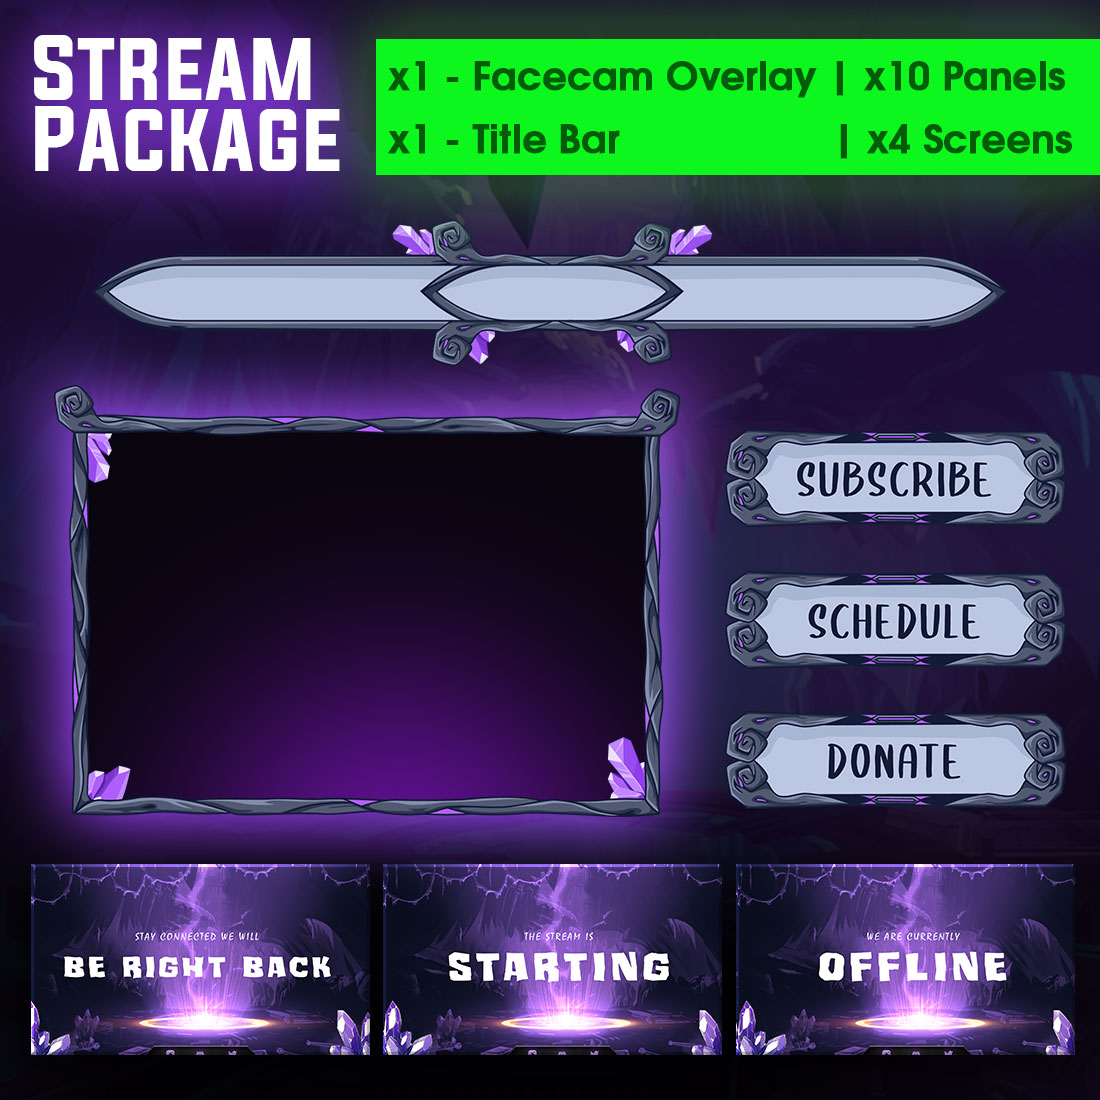 Fantasy Purple Stream Overlay Pack for Twitch / youtube Streamers cover image.